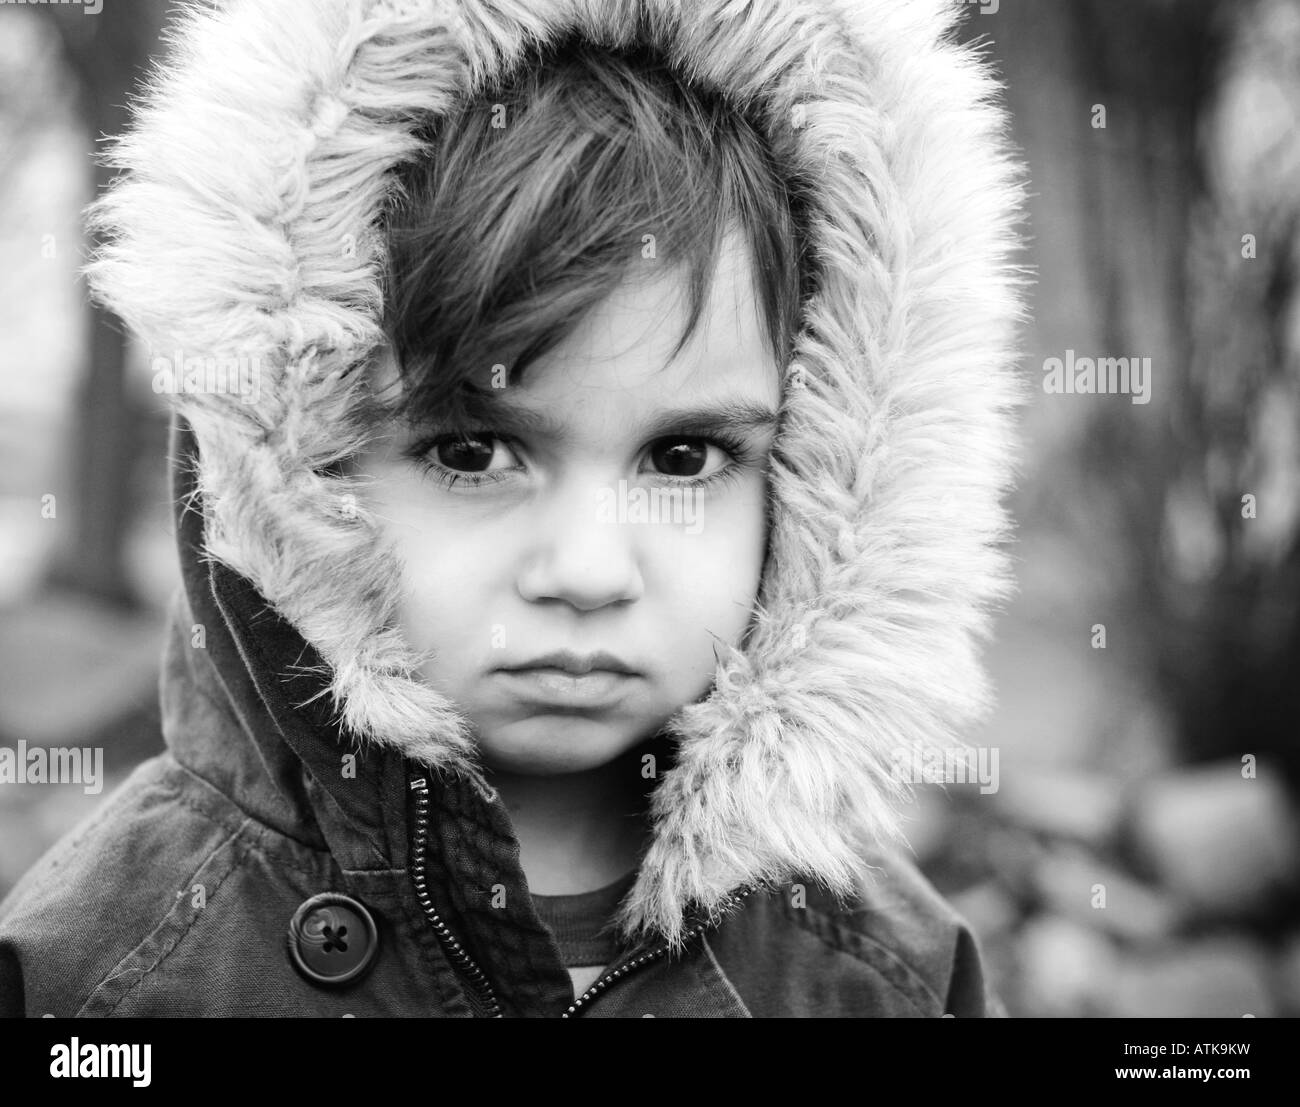 young child with fur hood with serious stare Stock Photo